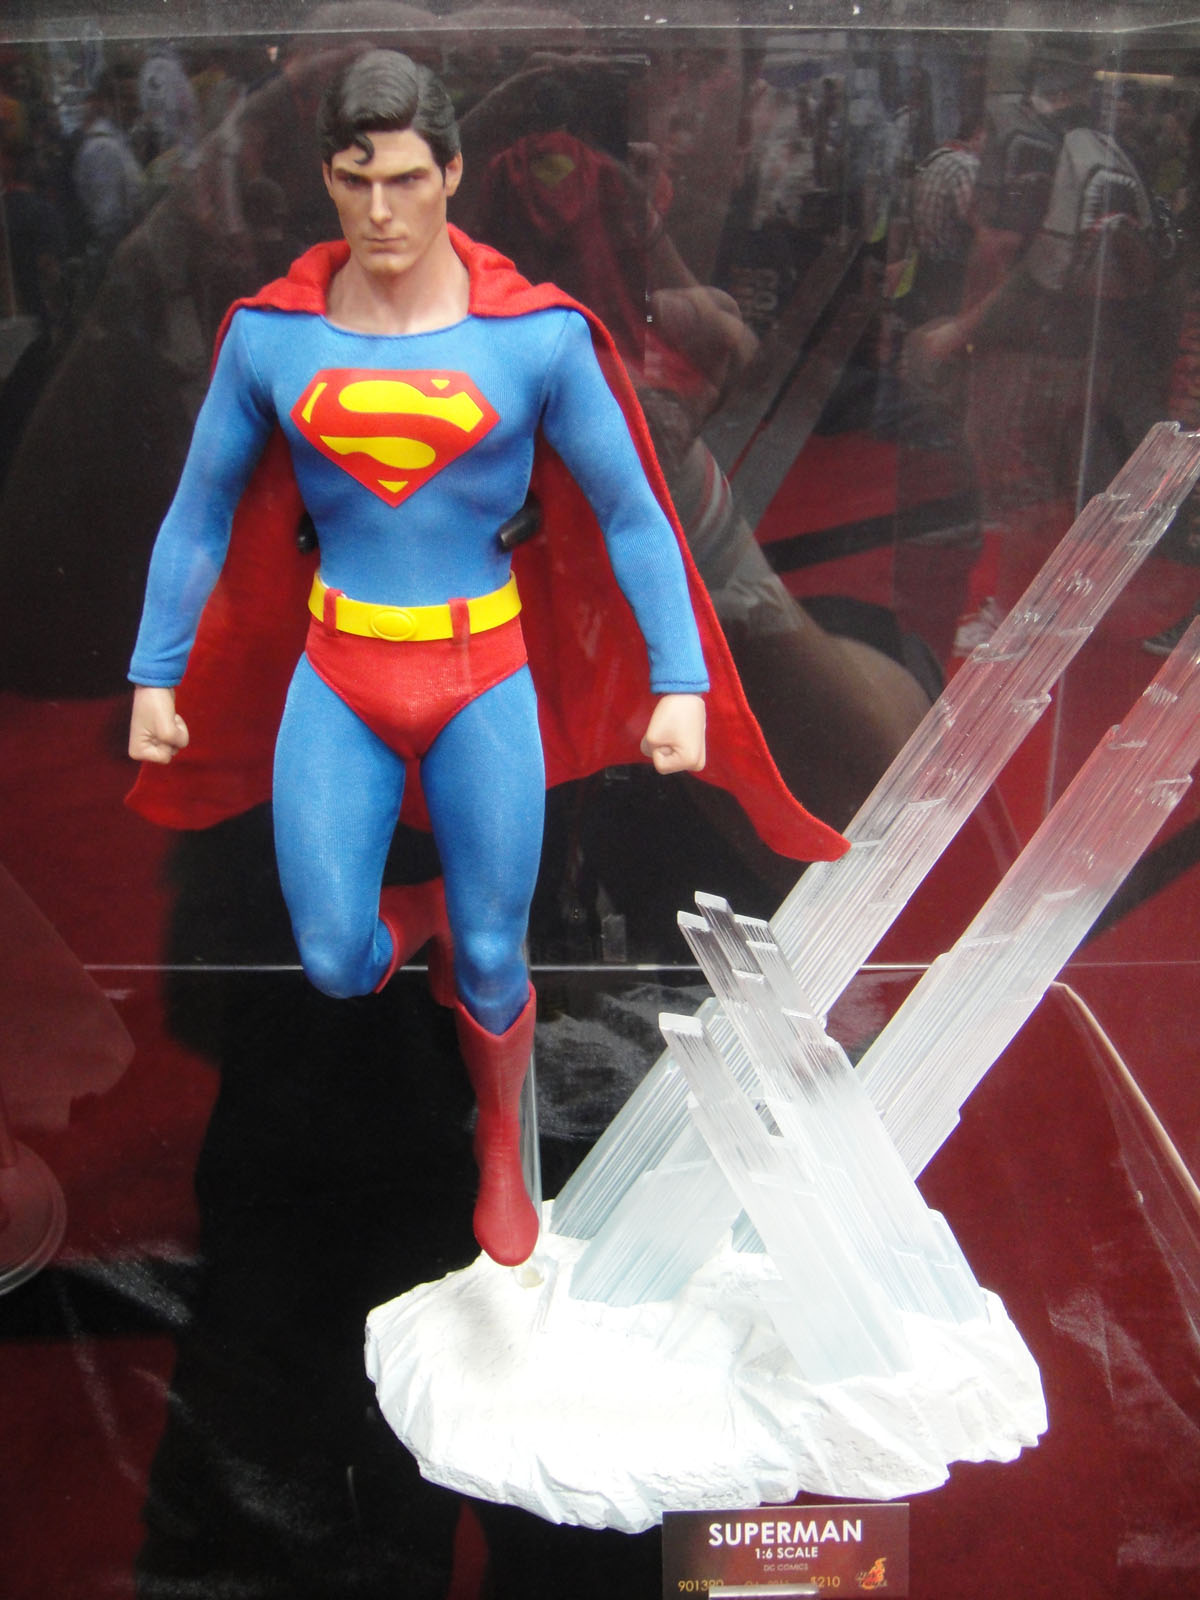 there is a model superman on display at the store